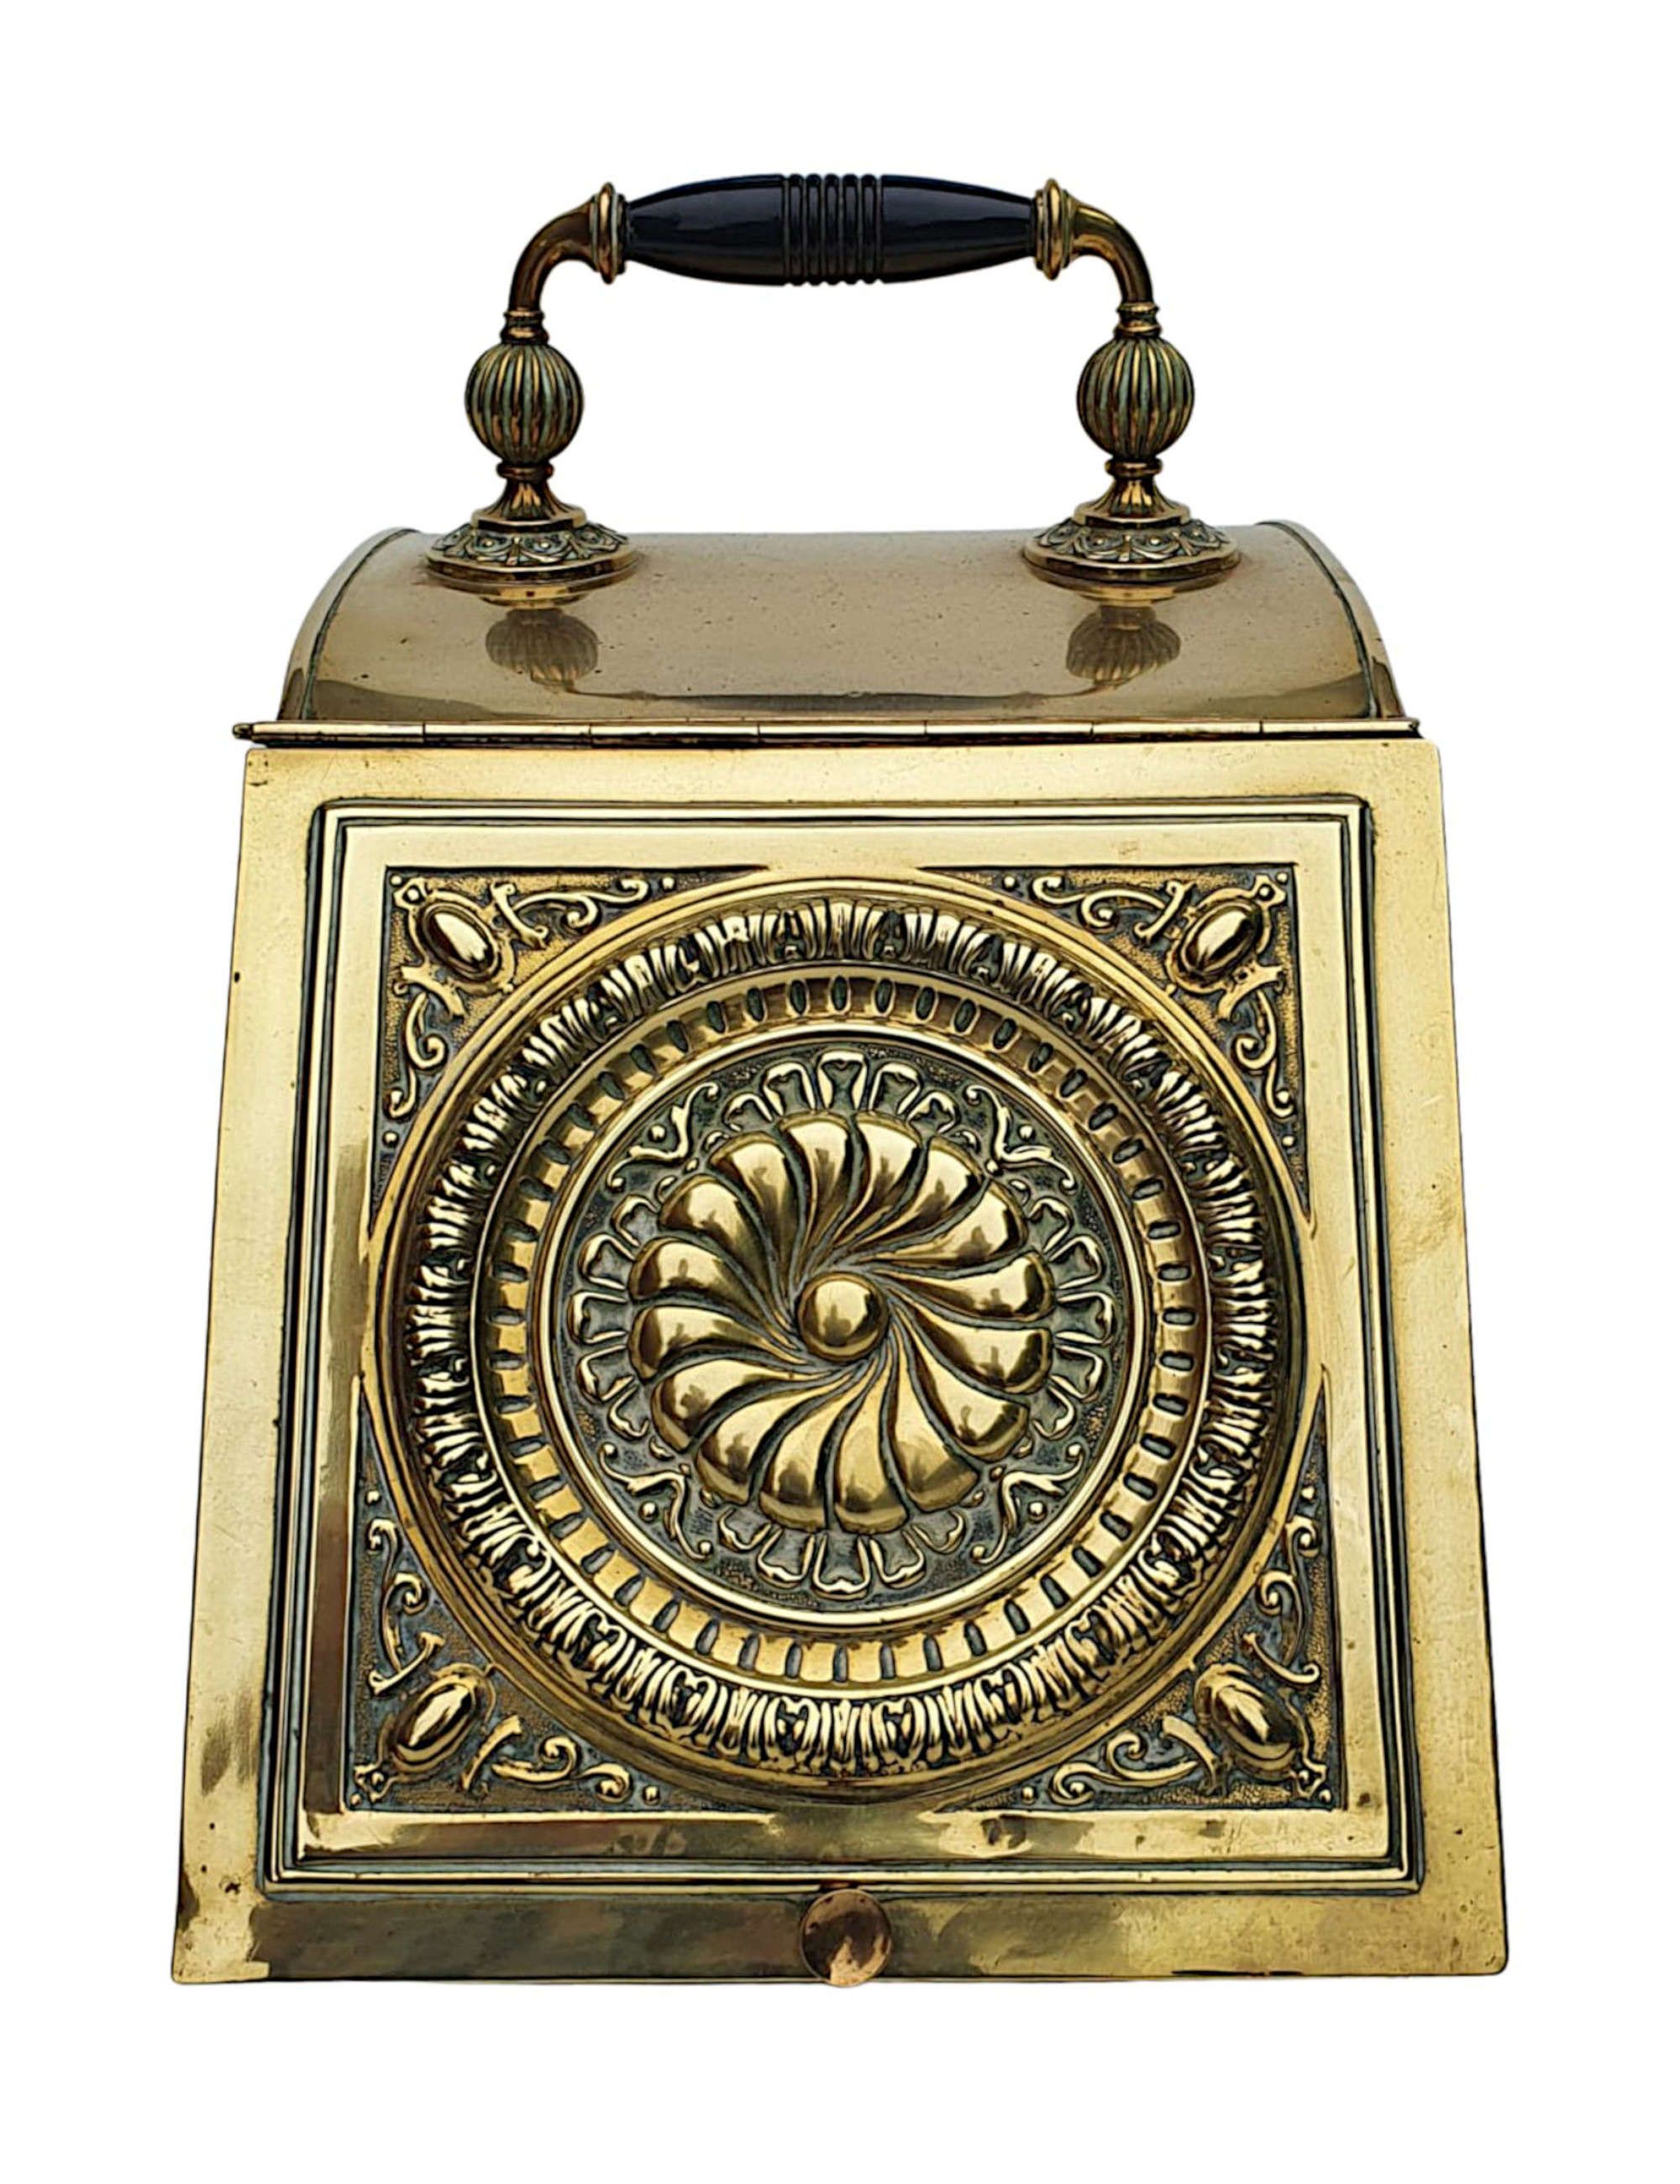 A Lovely 19th Century Brass Coal Scuttle